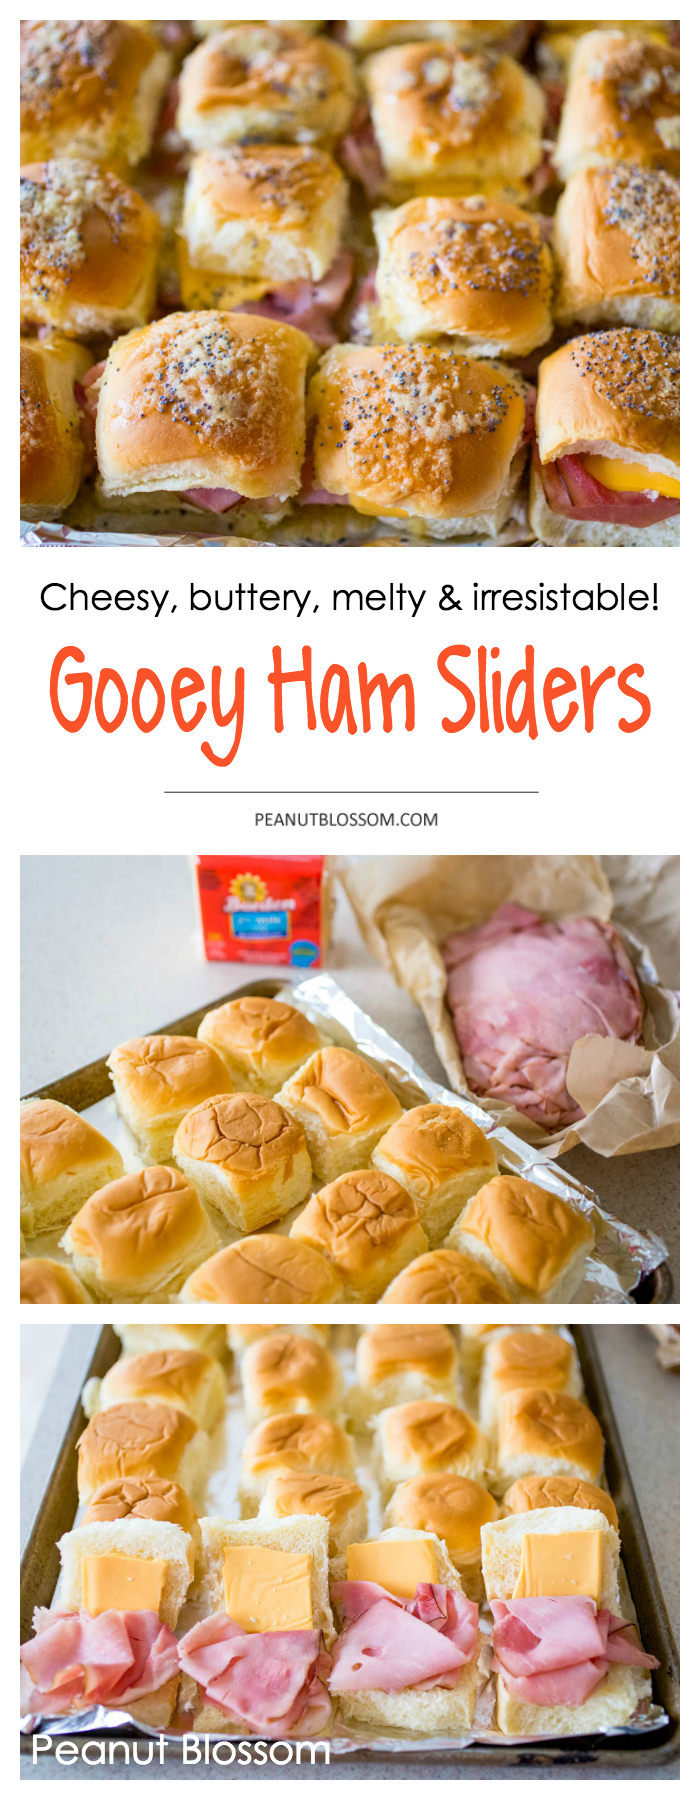 Buttery delicious Hawaiian roll ham and cheese sliders are the perfect party food for feeding a large crowd. Make a big pan of them in minutes and pile them up on a platter to serve.